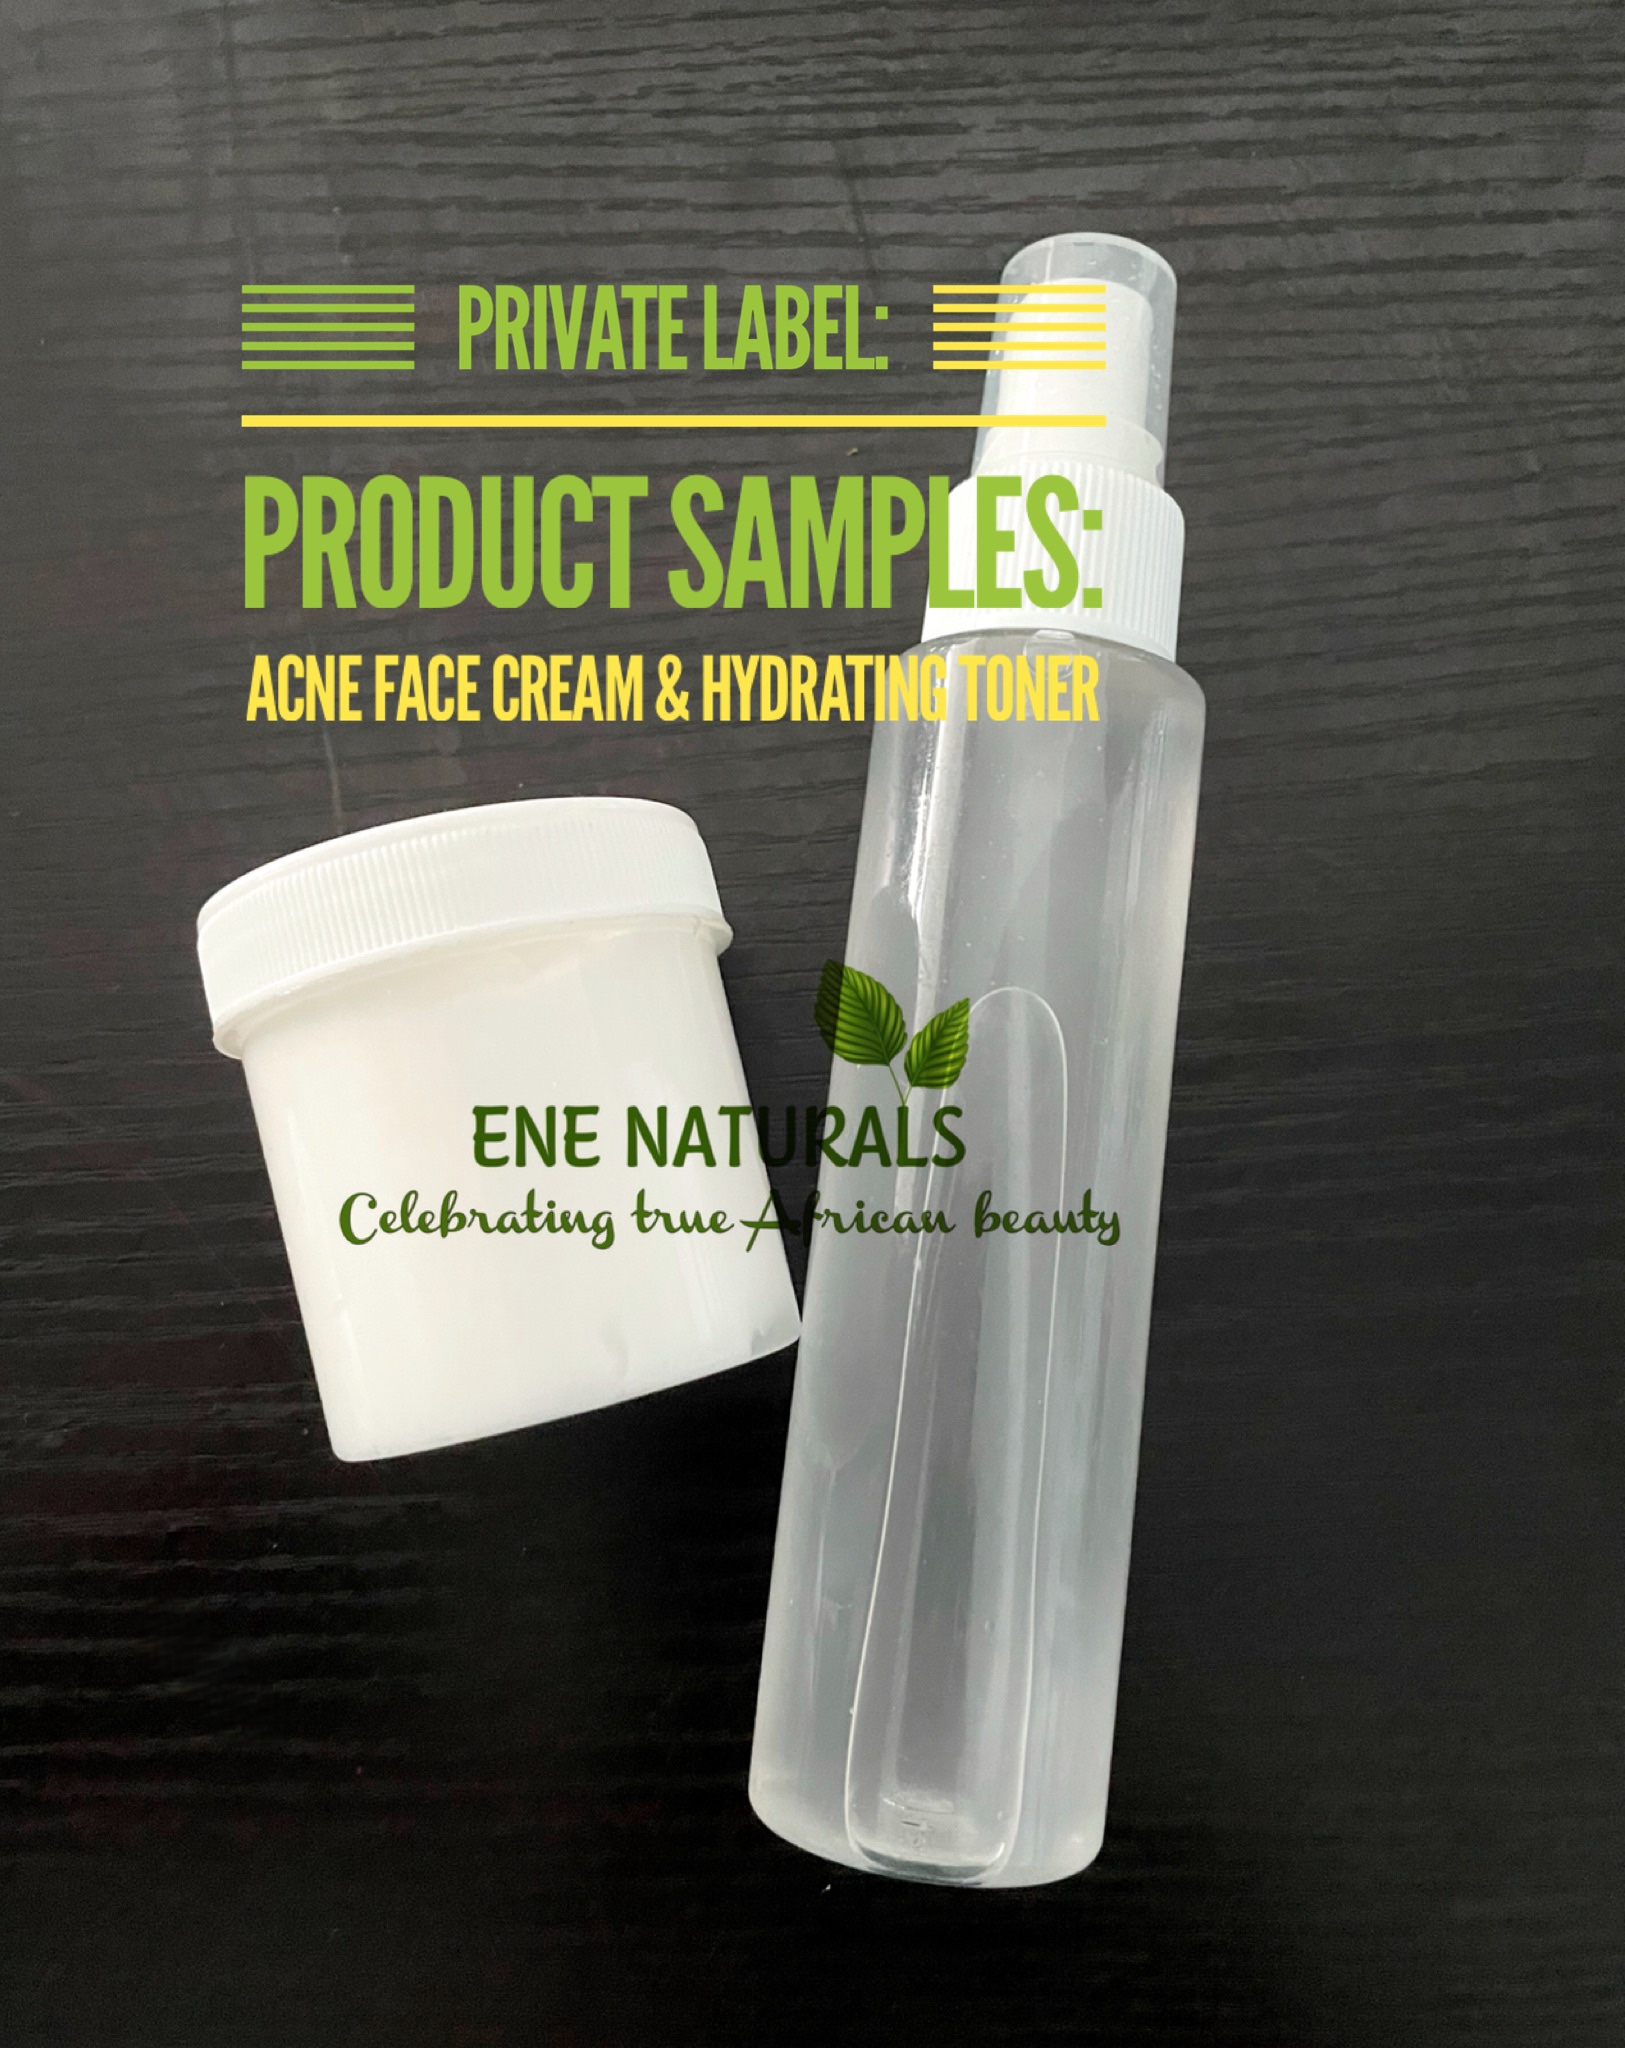 private label product samples